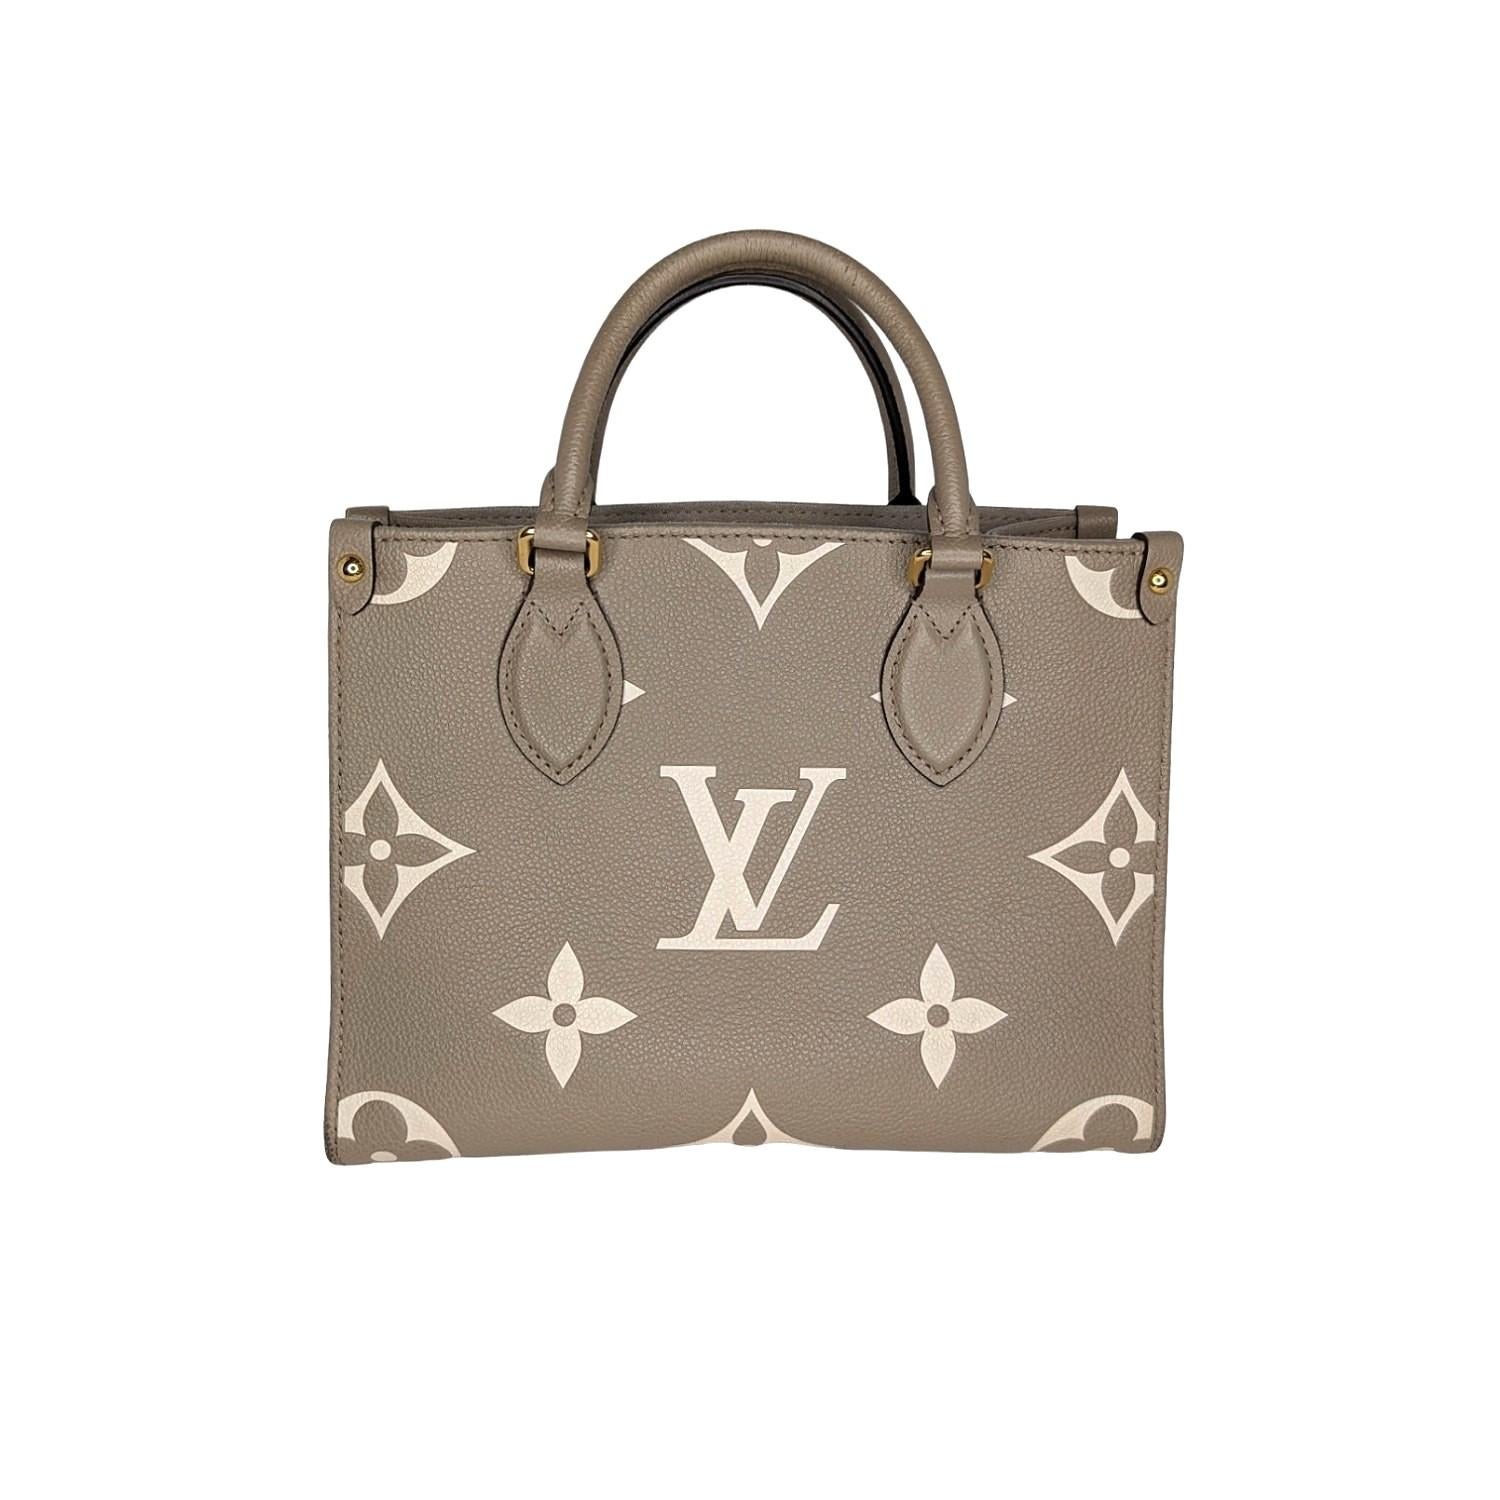 Louis Vuitton Empreinte Monogram Giant Onthego PM in Tourterelle Creme. This limited edition tote features oversized versions of the classic Louis Vuitton monogram leather in beige. The bag features beige leather top handles, an optional shoulder